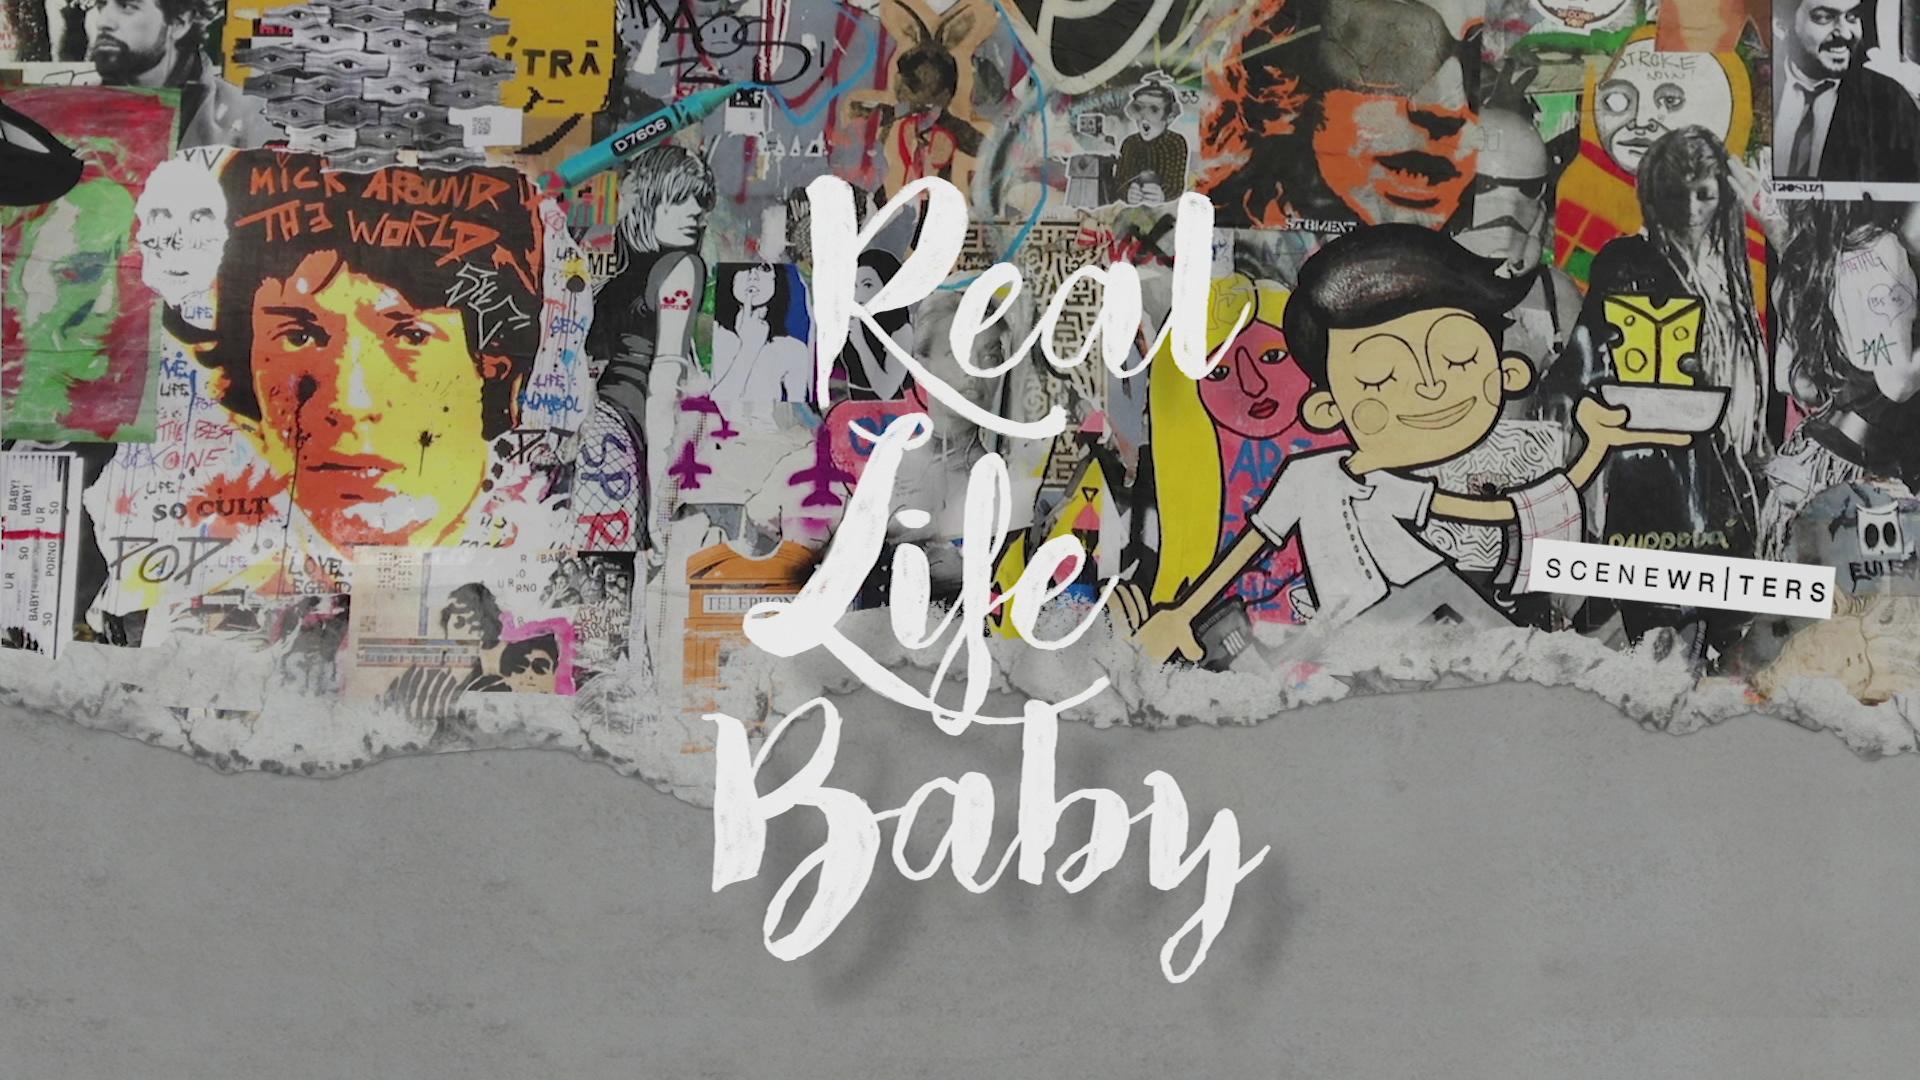 Scene Writers - Scene Writers vs. Cookin' on 3 Burners - Real Life Baby (Official Lyric Video)